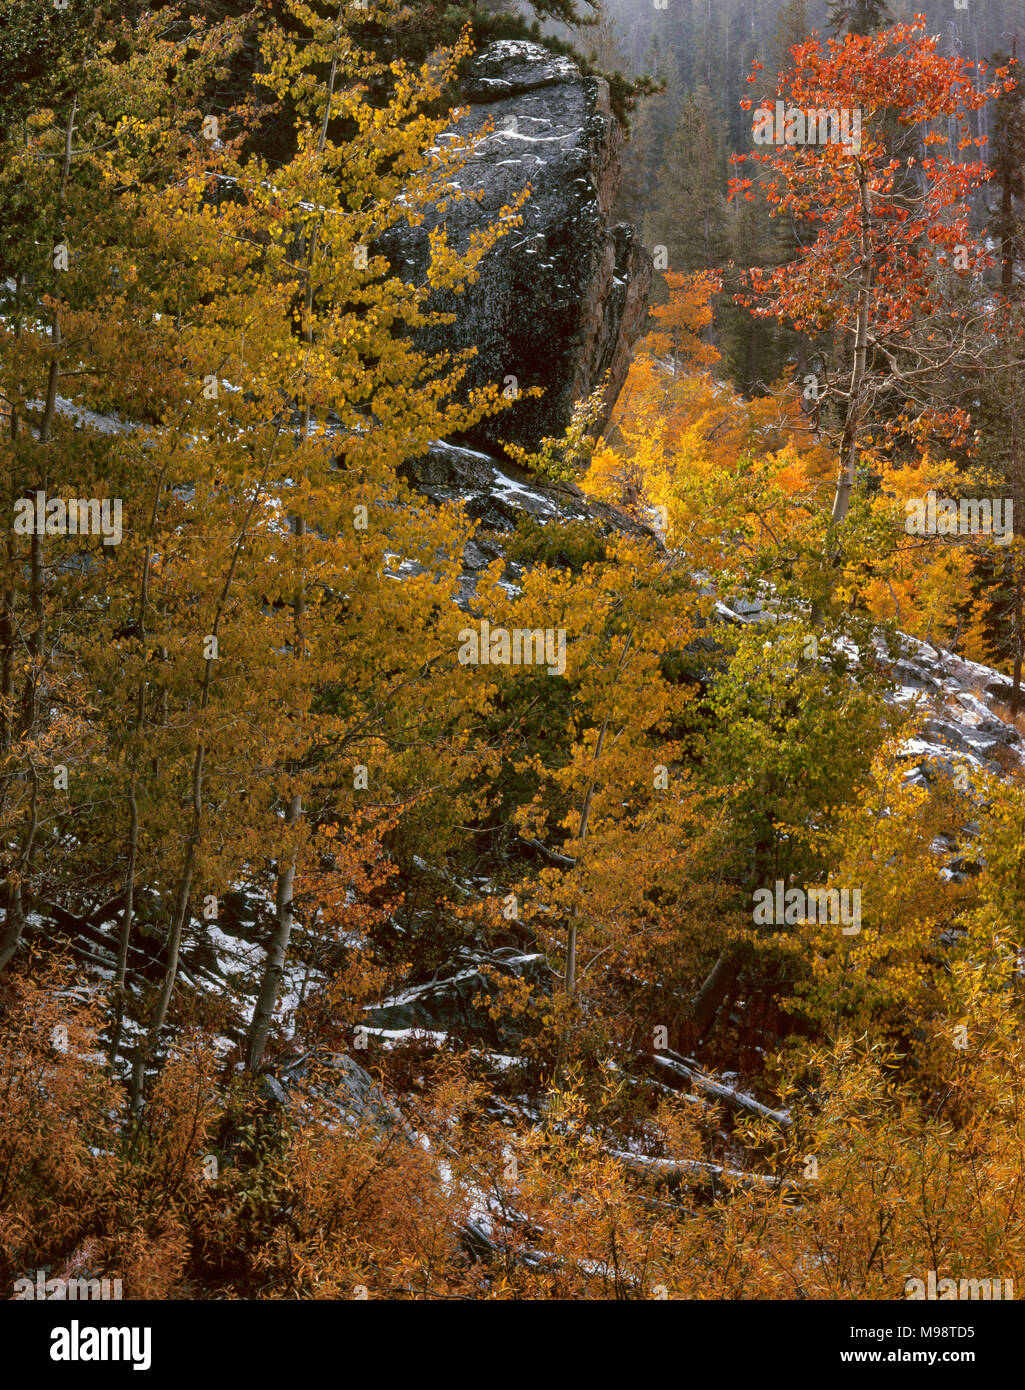 Fall Colors, Jenny Lakes Wilderness, Giant Sequoia National Monument, Sierra Nevada Mountains, California Stock Photo